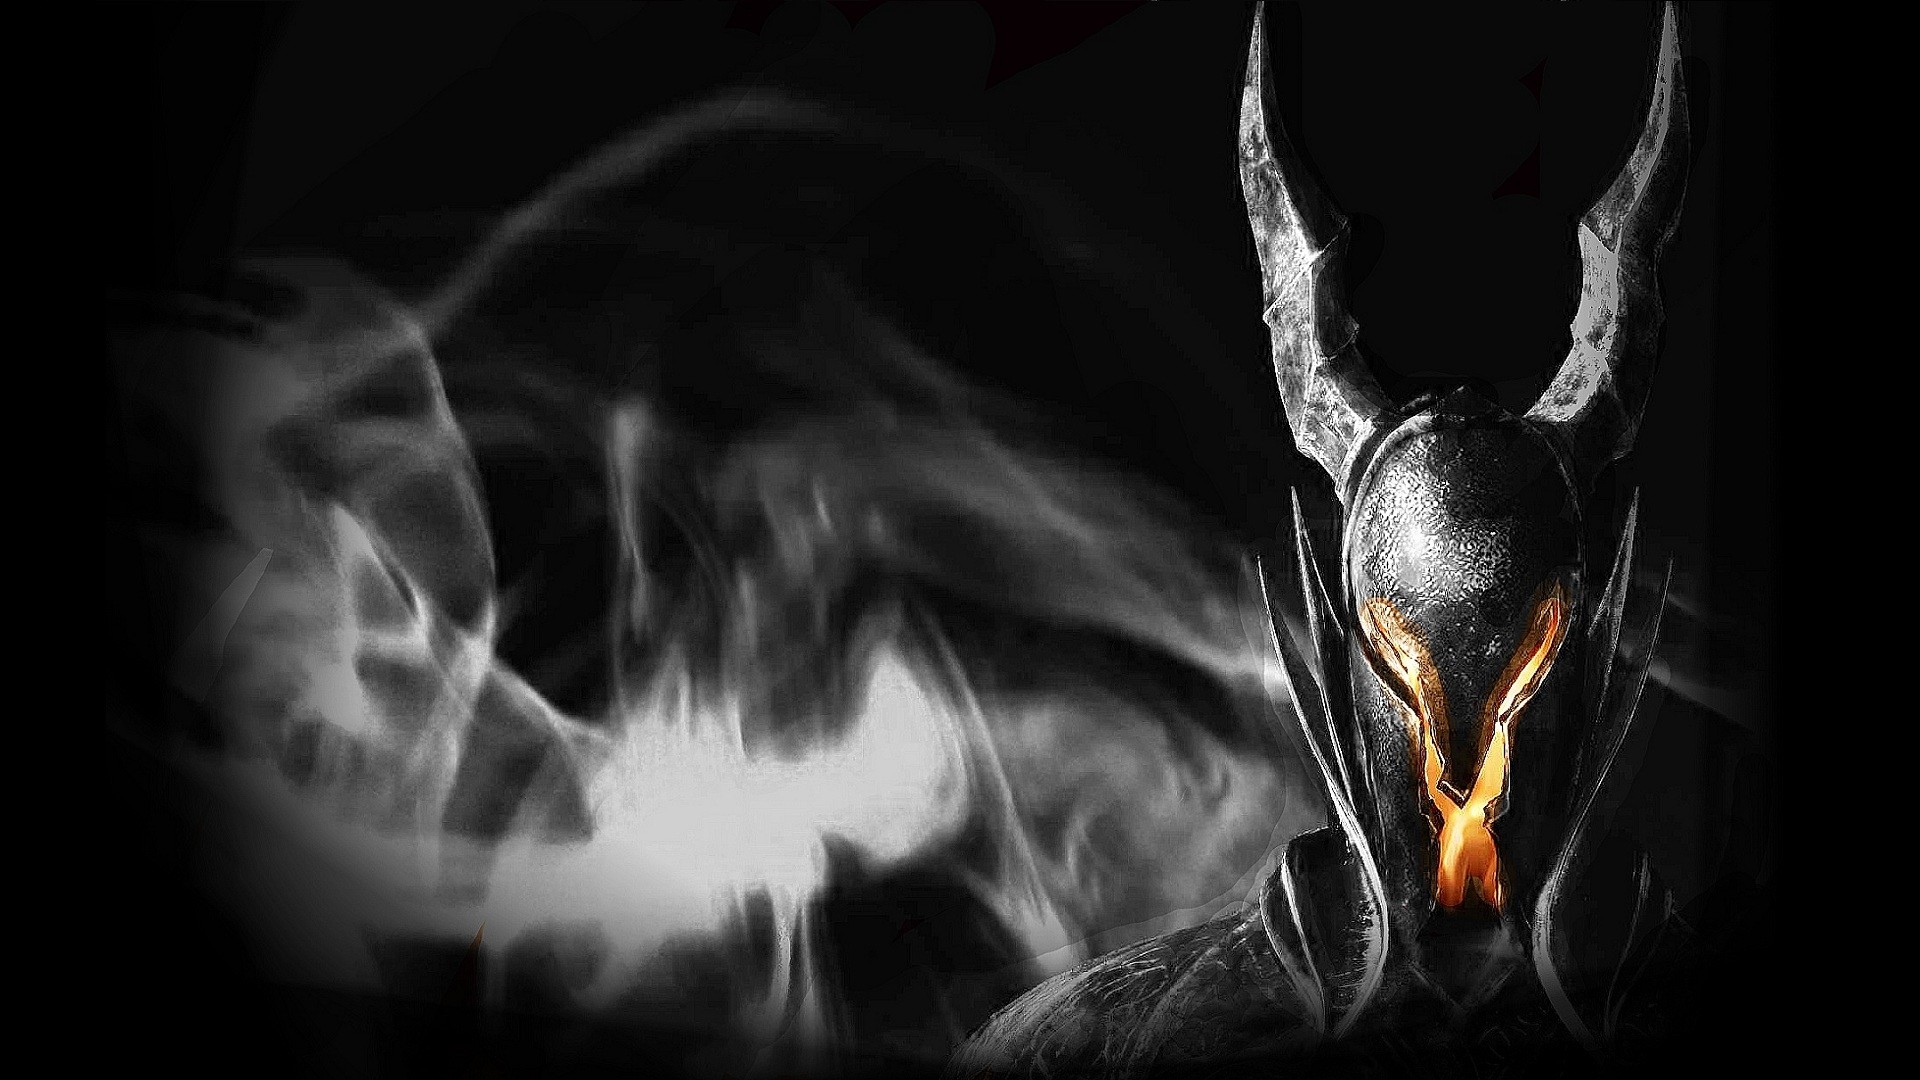 Dark Souls Black Knight Wallpapers For Android Is Cool - Black Knight Dark Souls - HD Wallpaper 